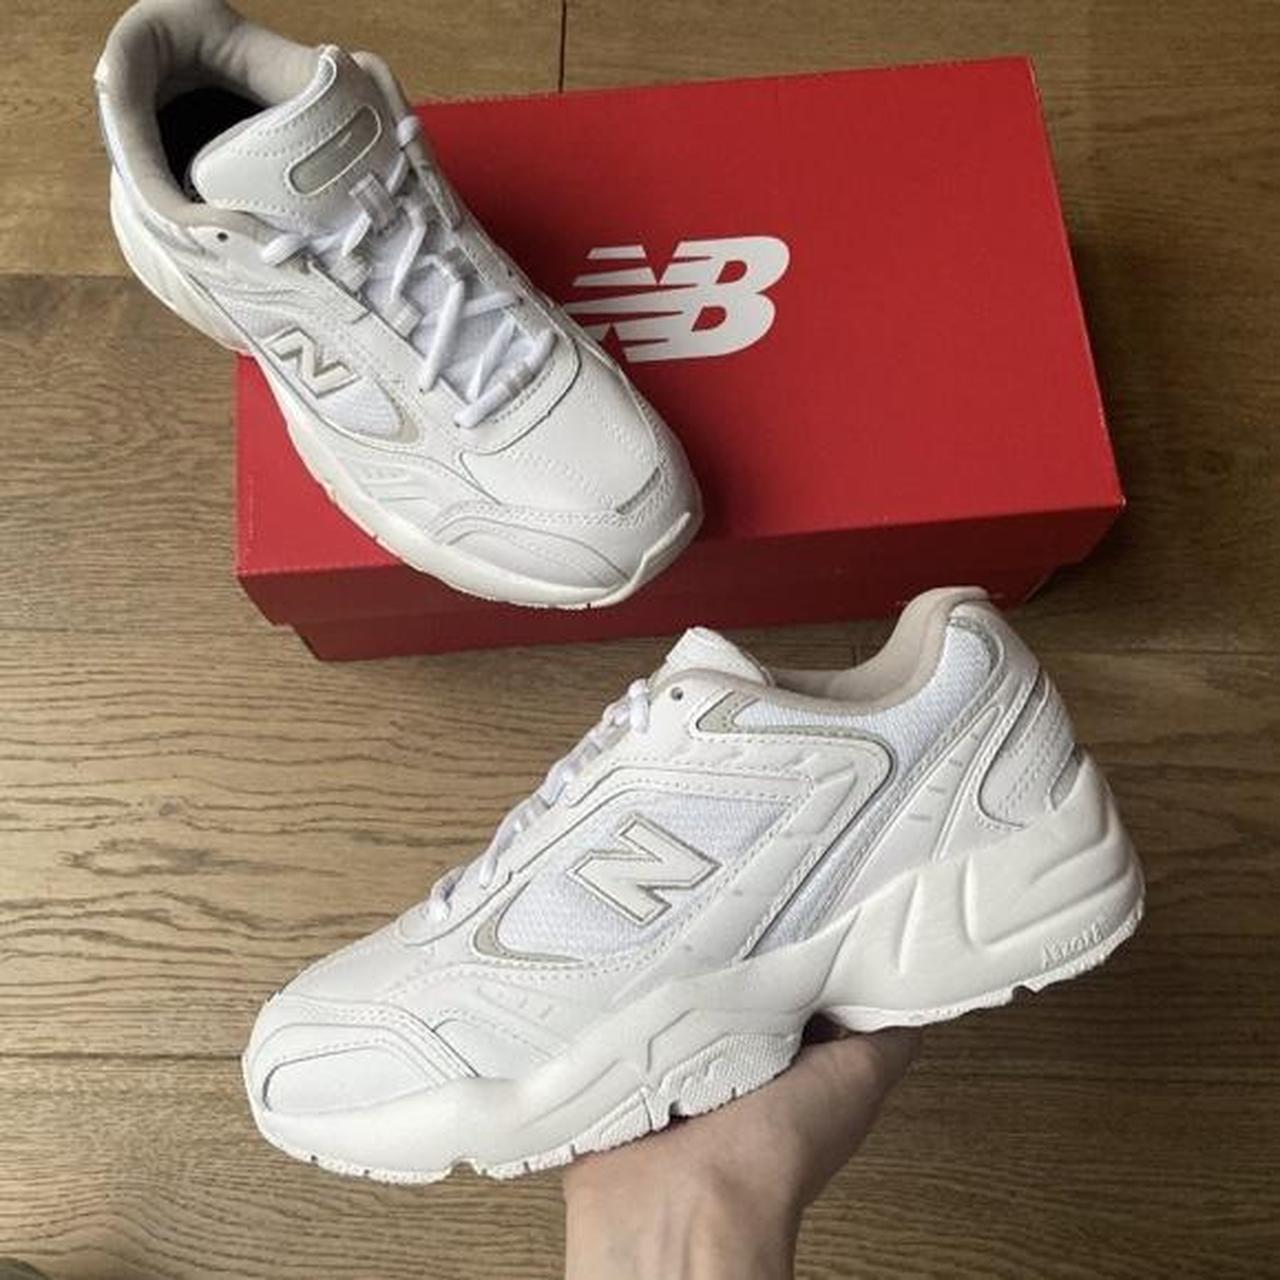 New Balance 452 chunky trainers in white / light... - Depop